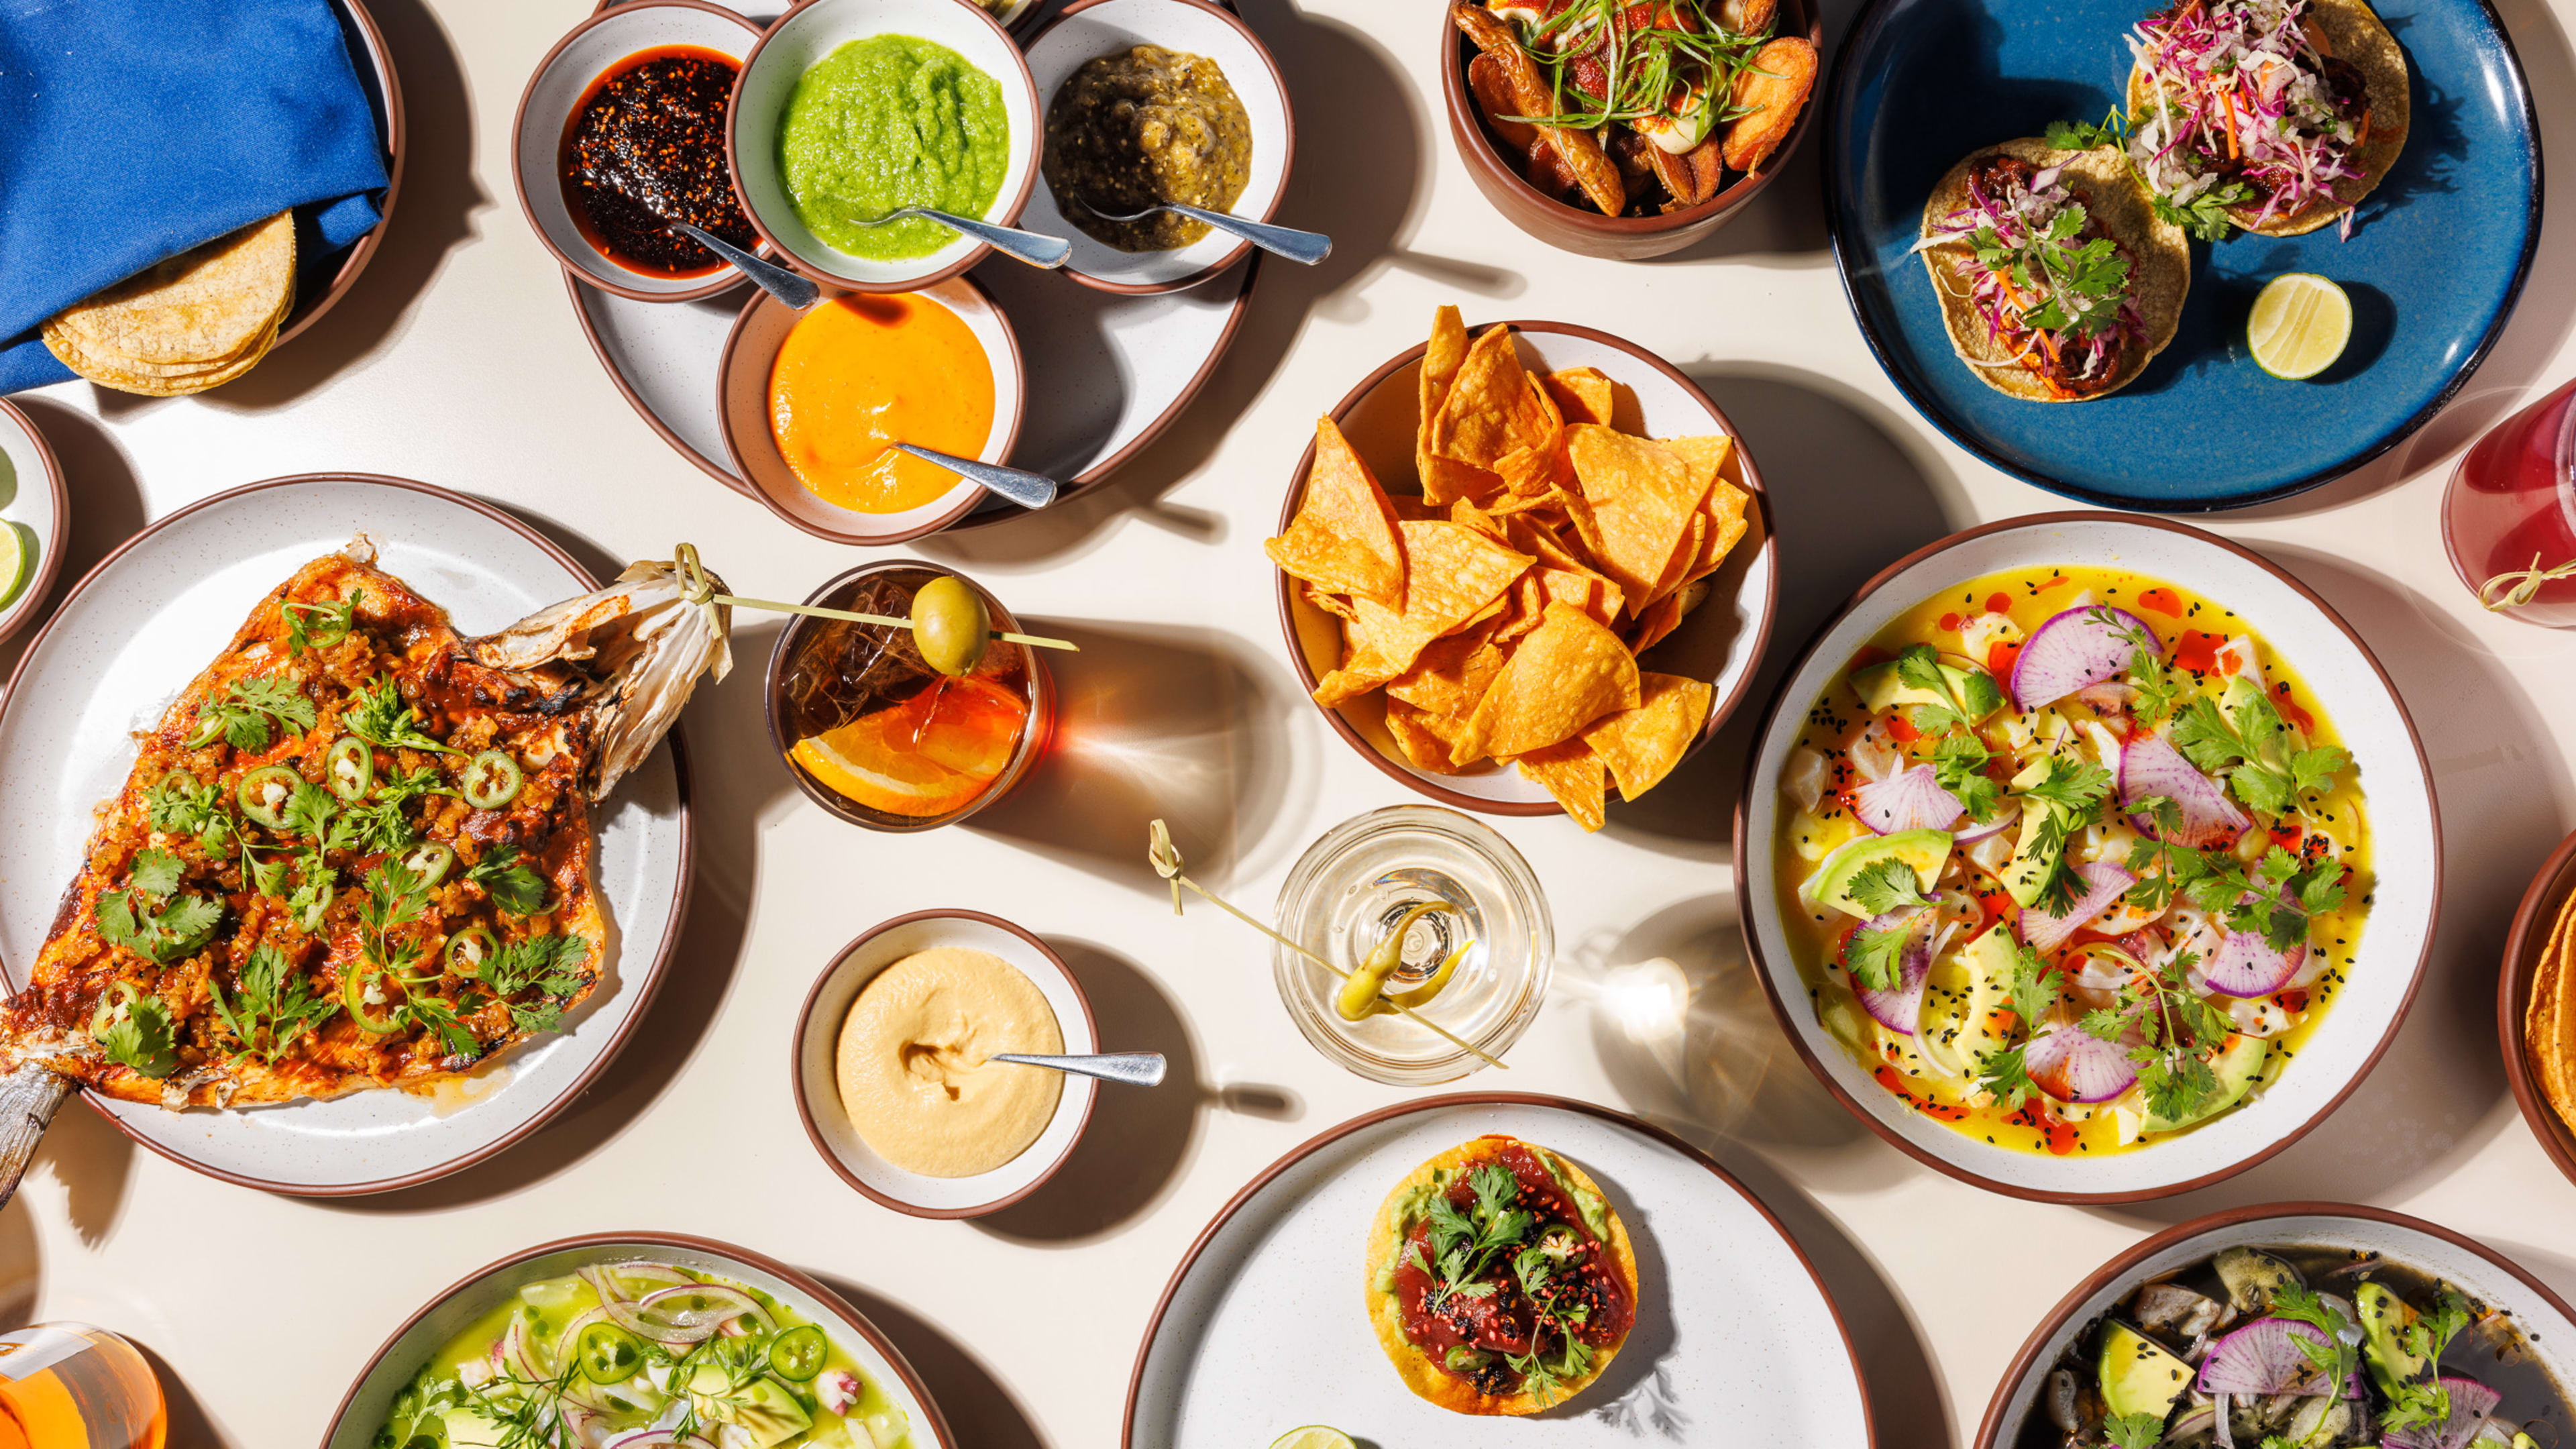 A large spread of colorful dishes including aguachile, fish, sauces, tacos, and cocktails.